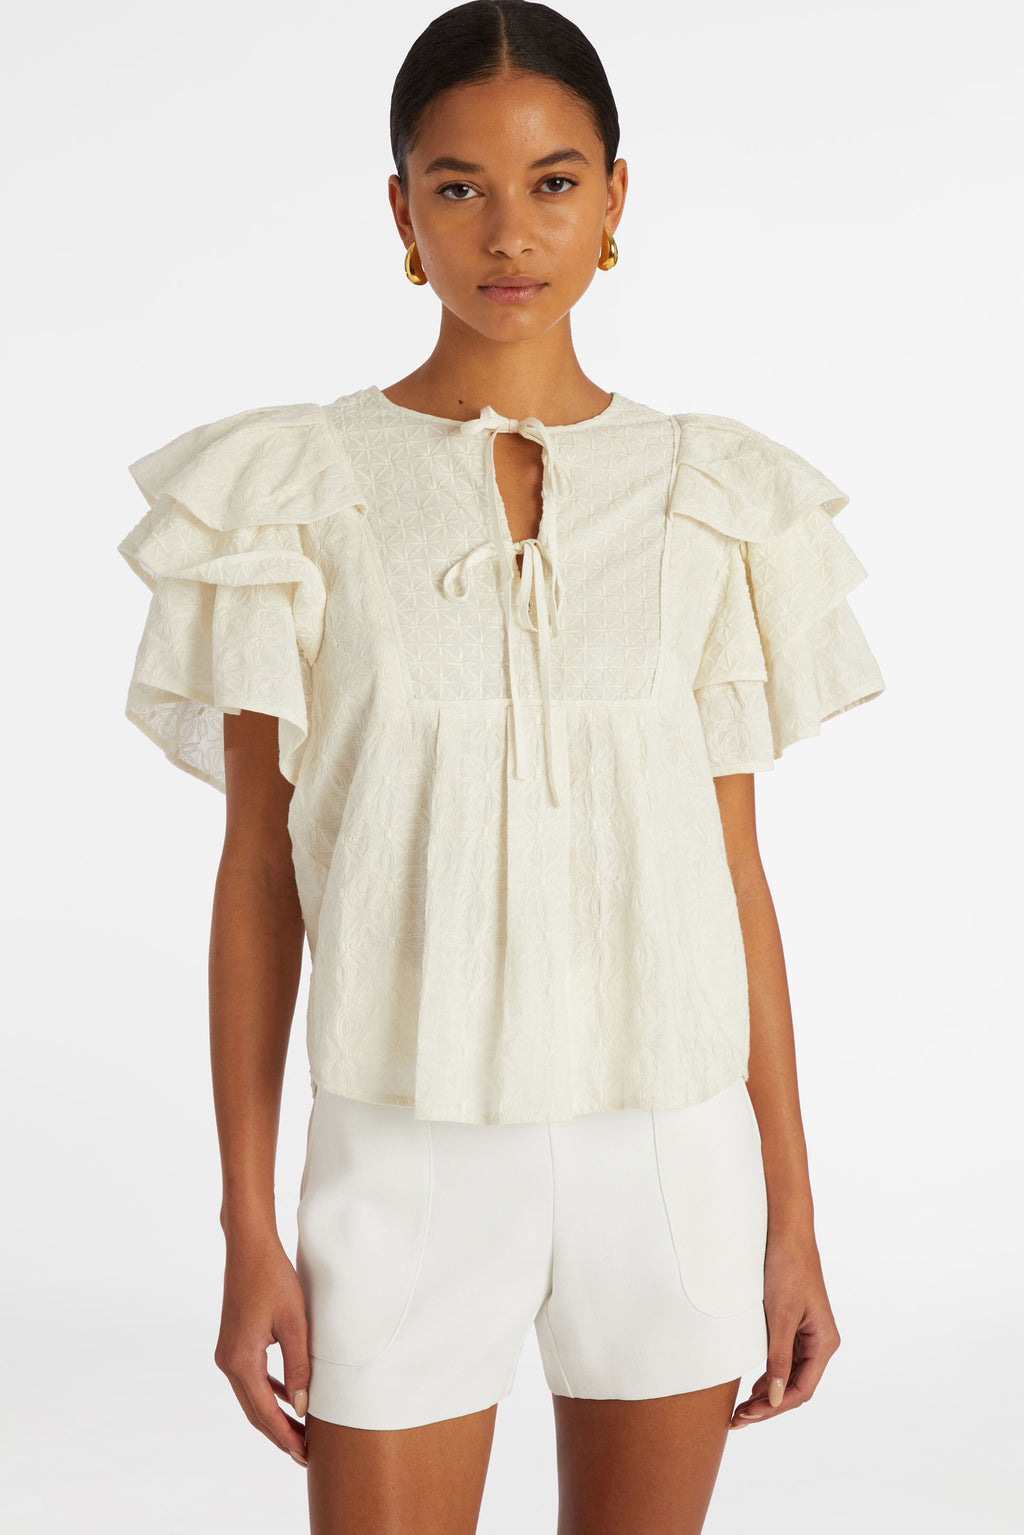 Top with an adjustable v-neckline in a solid white textured material